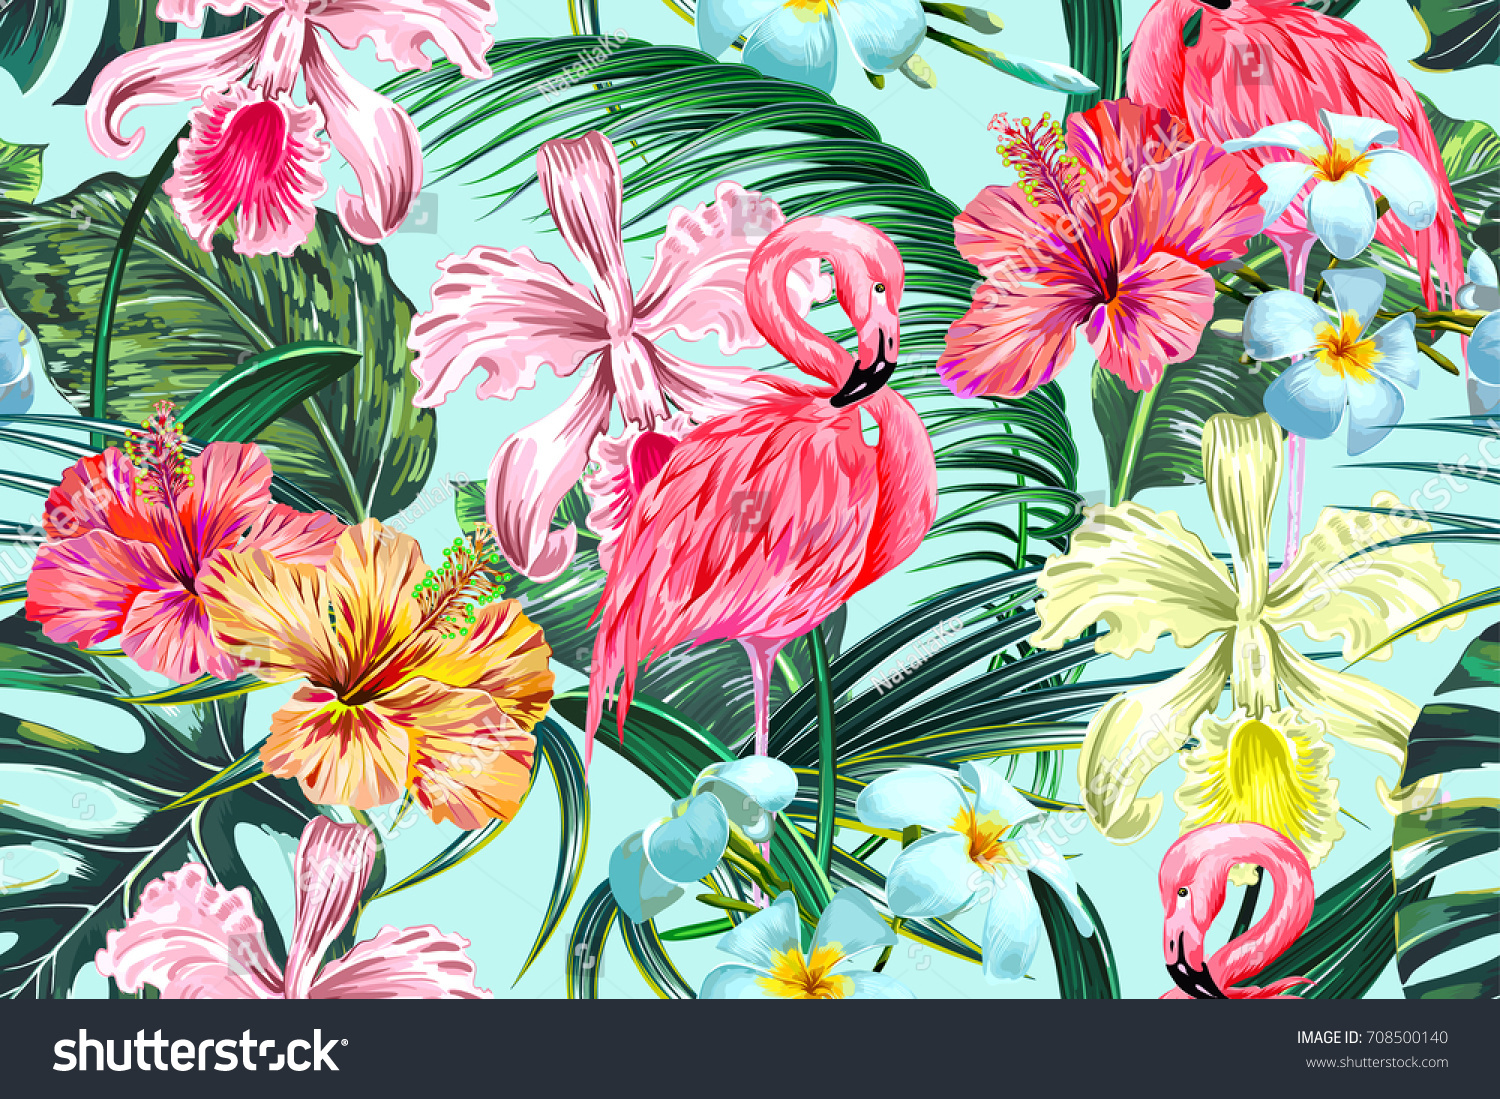 Floral Seamless Vector Tropical Pattern Background Stock Vector Royalty Free